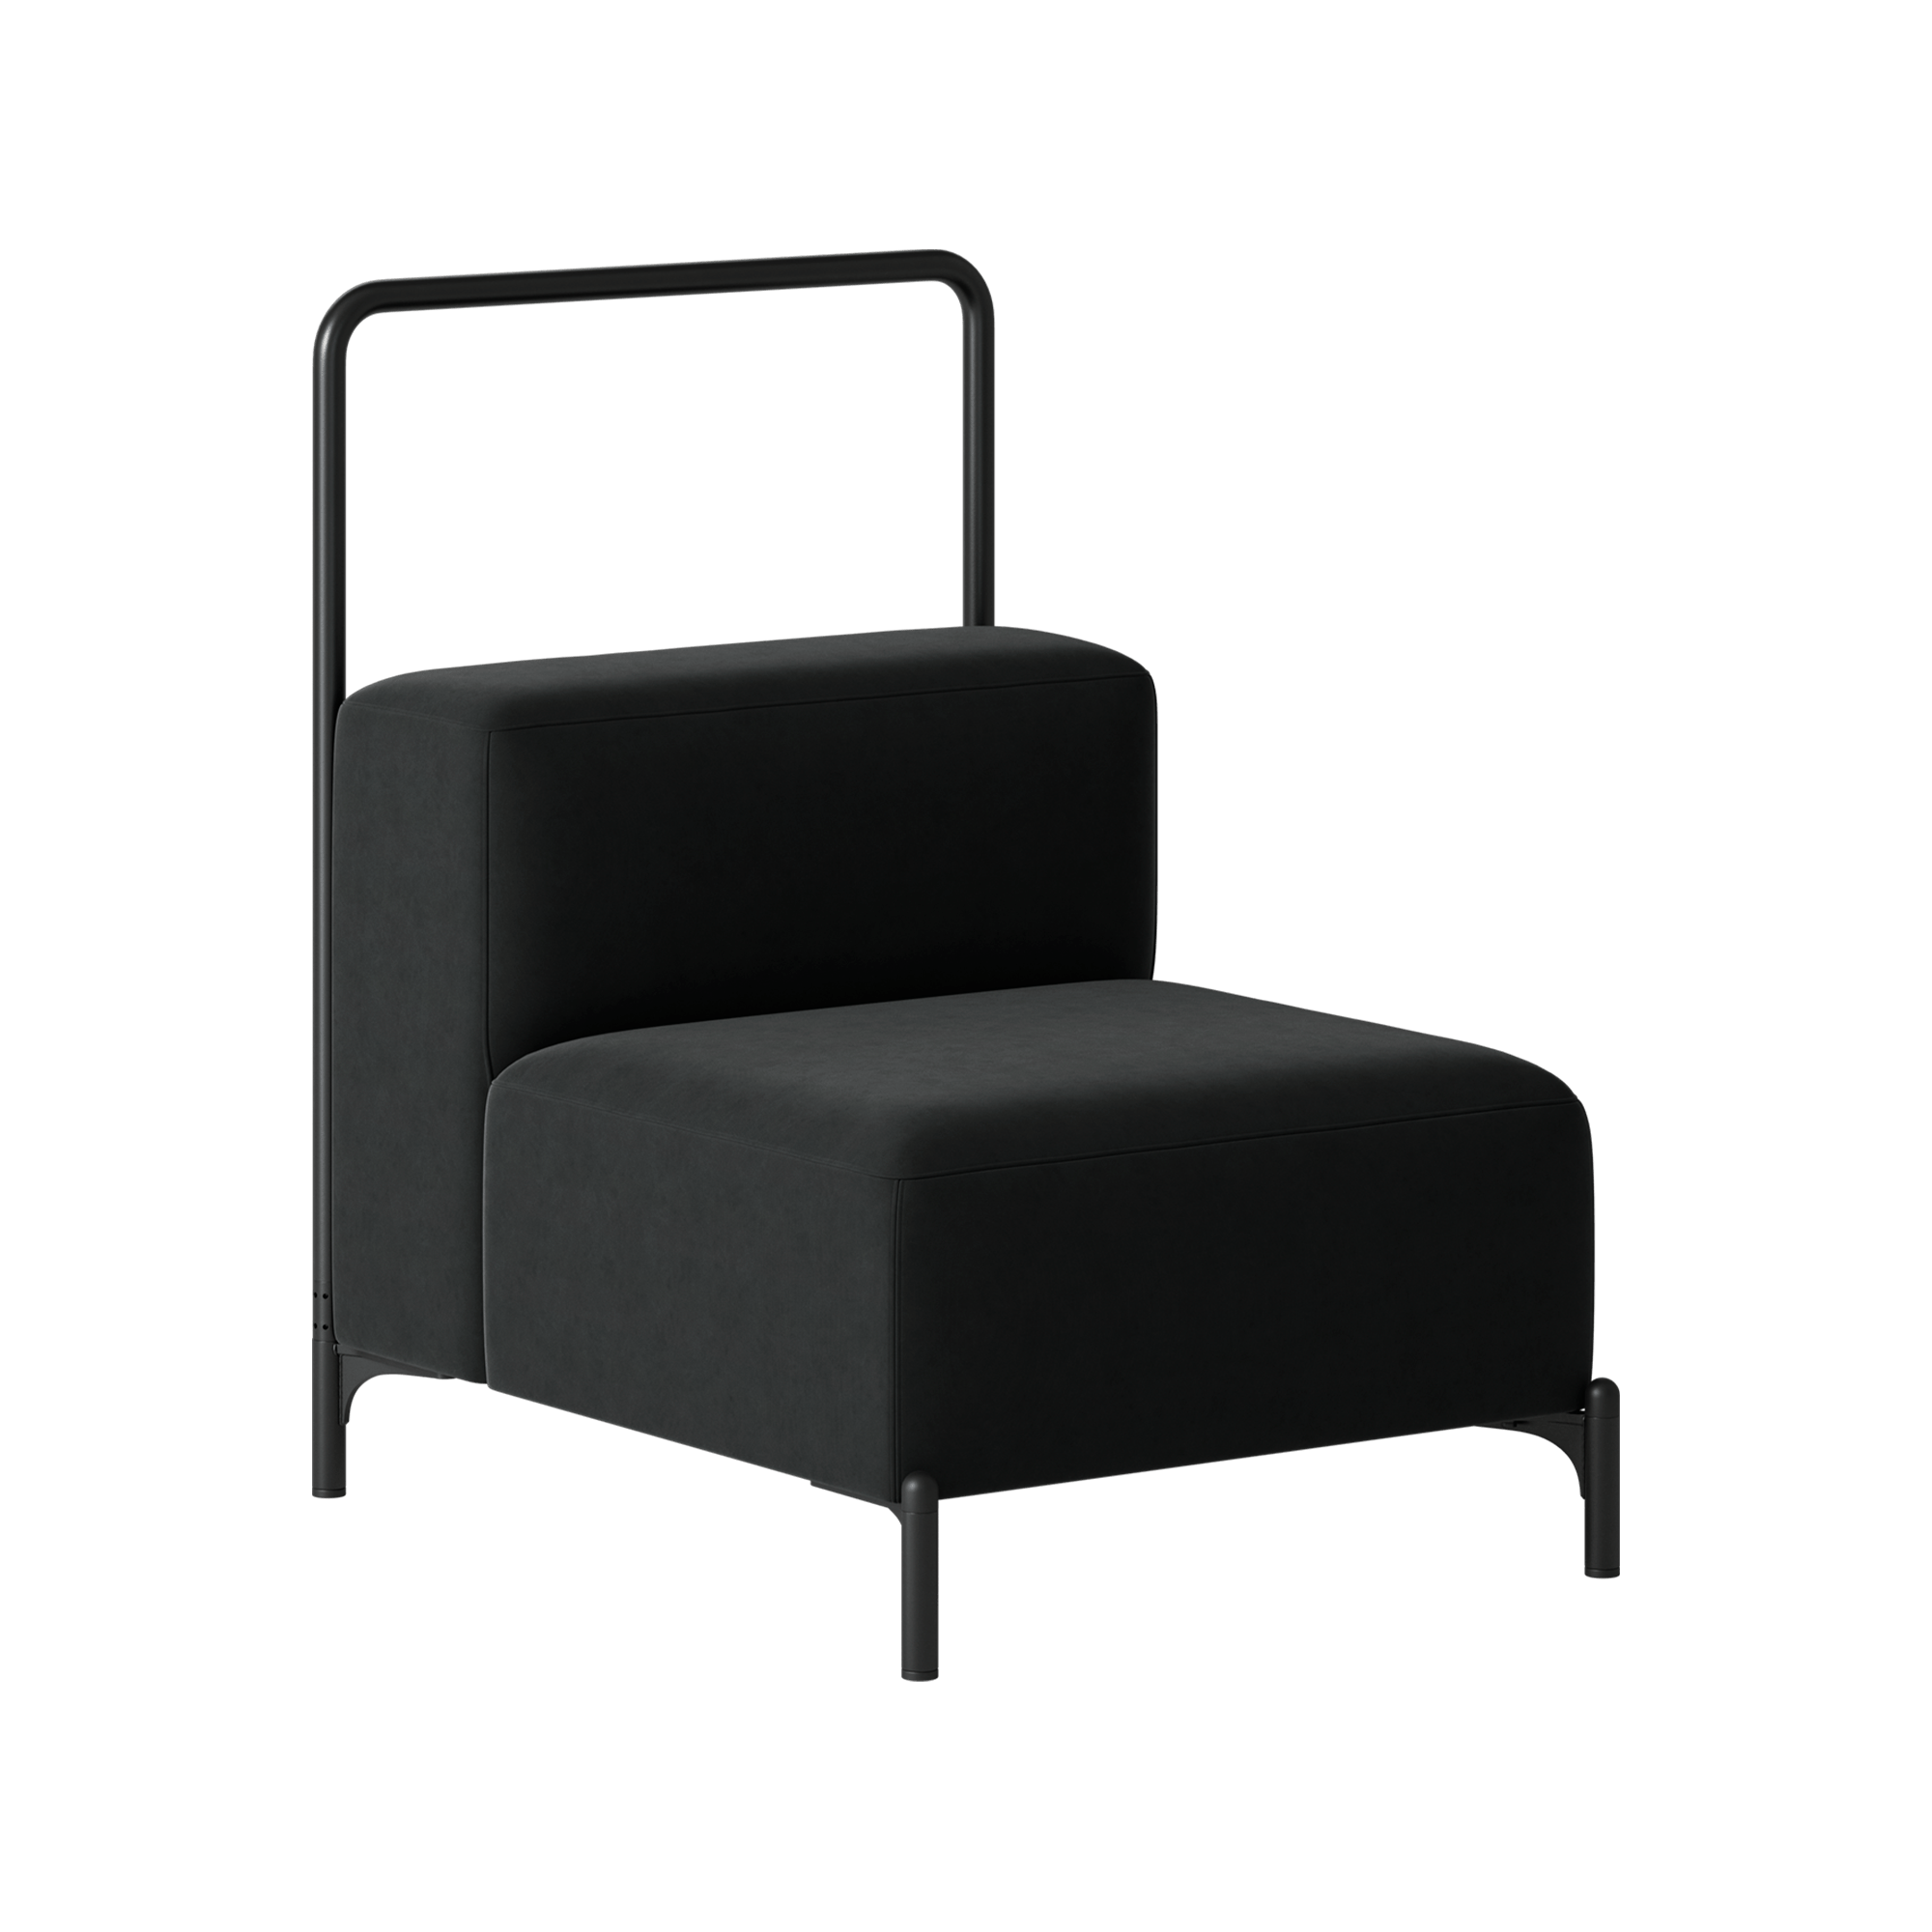 A black chair with a metal frame.